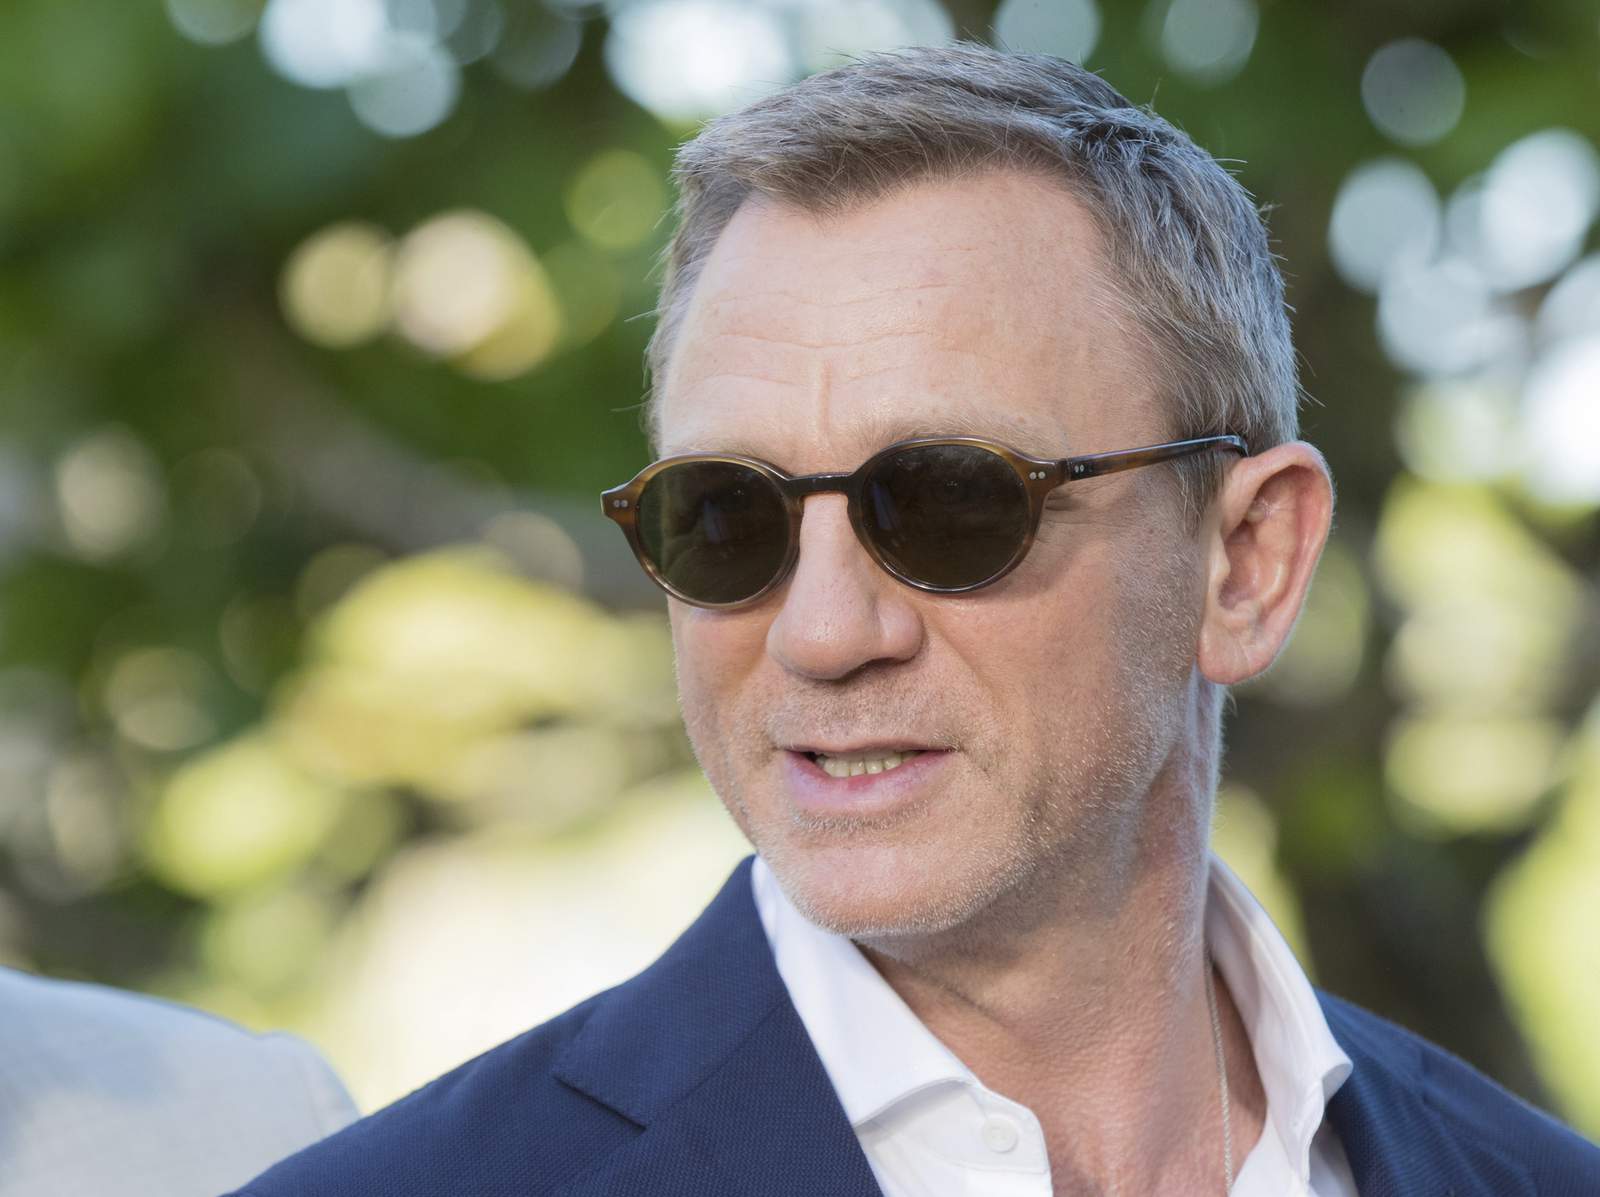 Bond film 'No Time to Die' delayed again because of virus